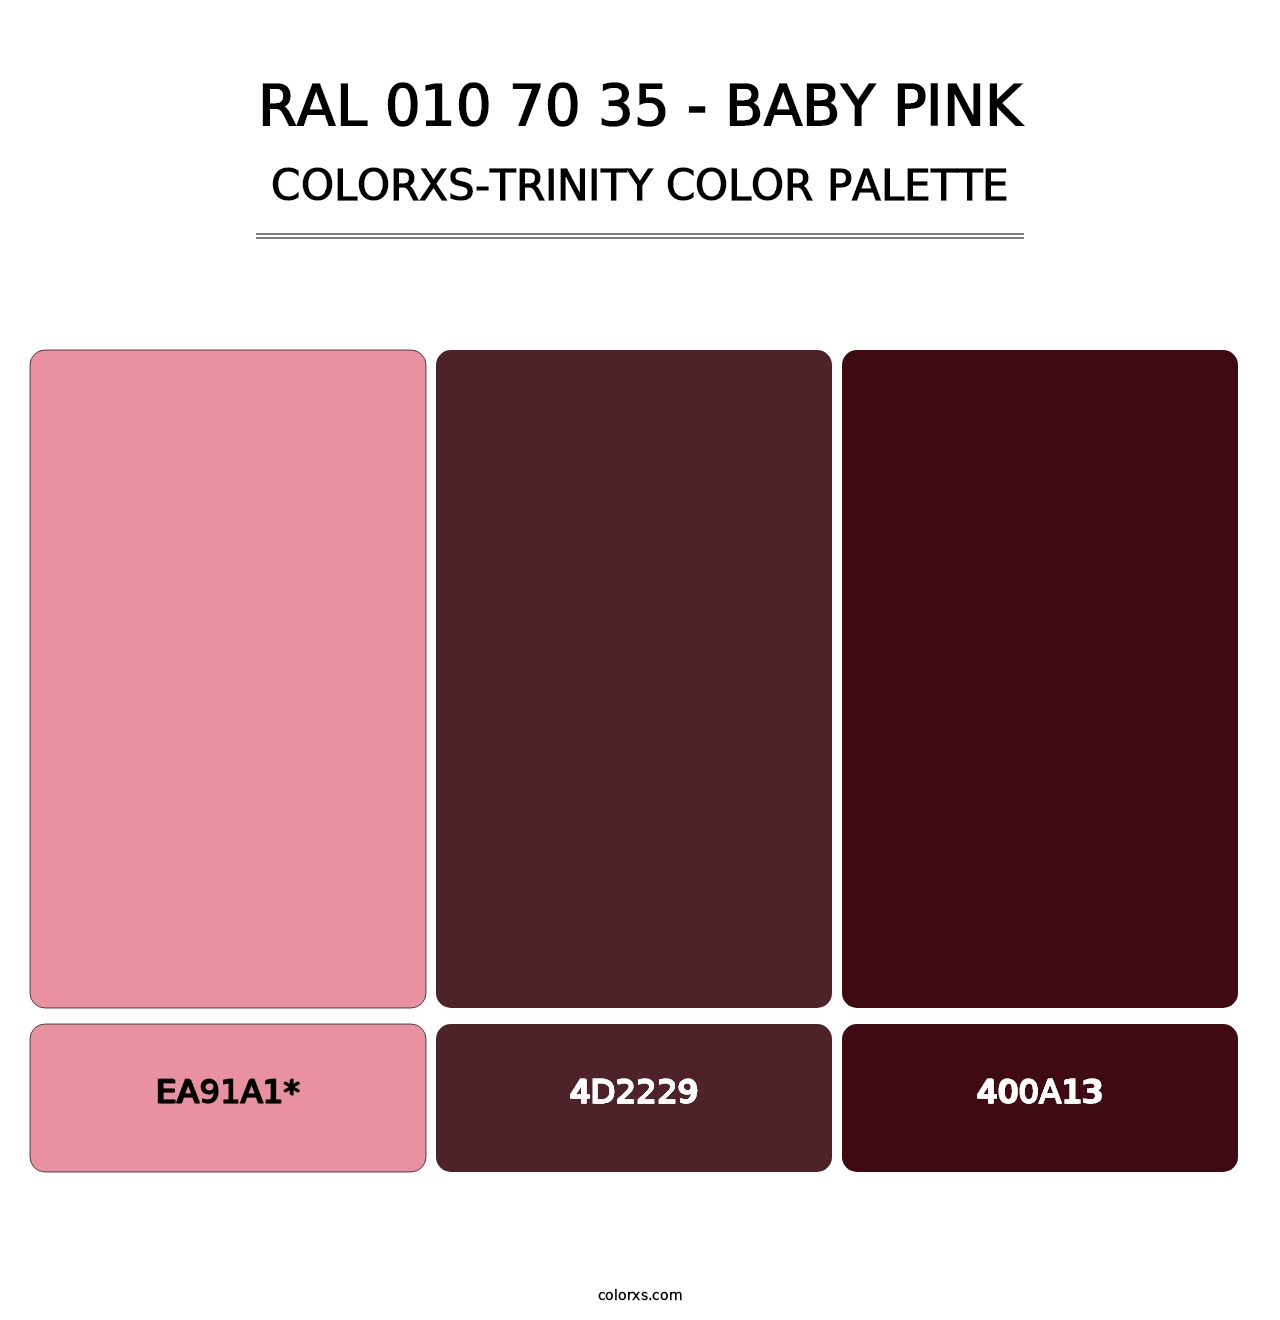 RAL 010 70 35 - Baby Pink - Colorxs Trinity Palette